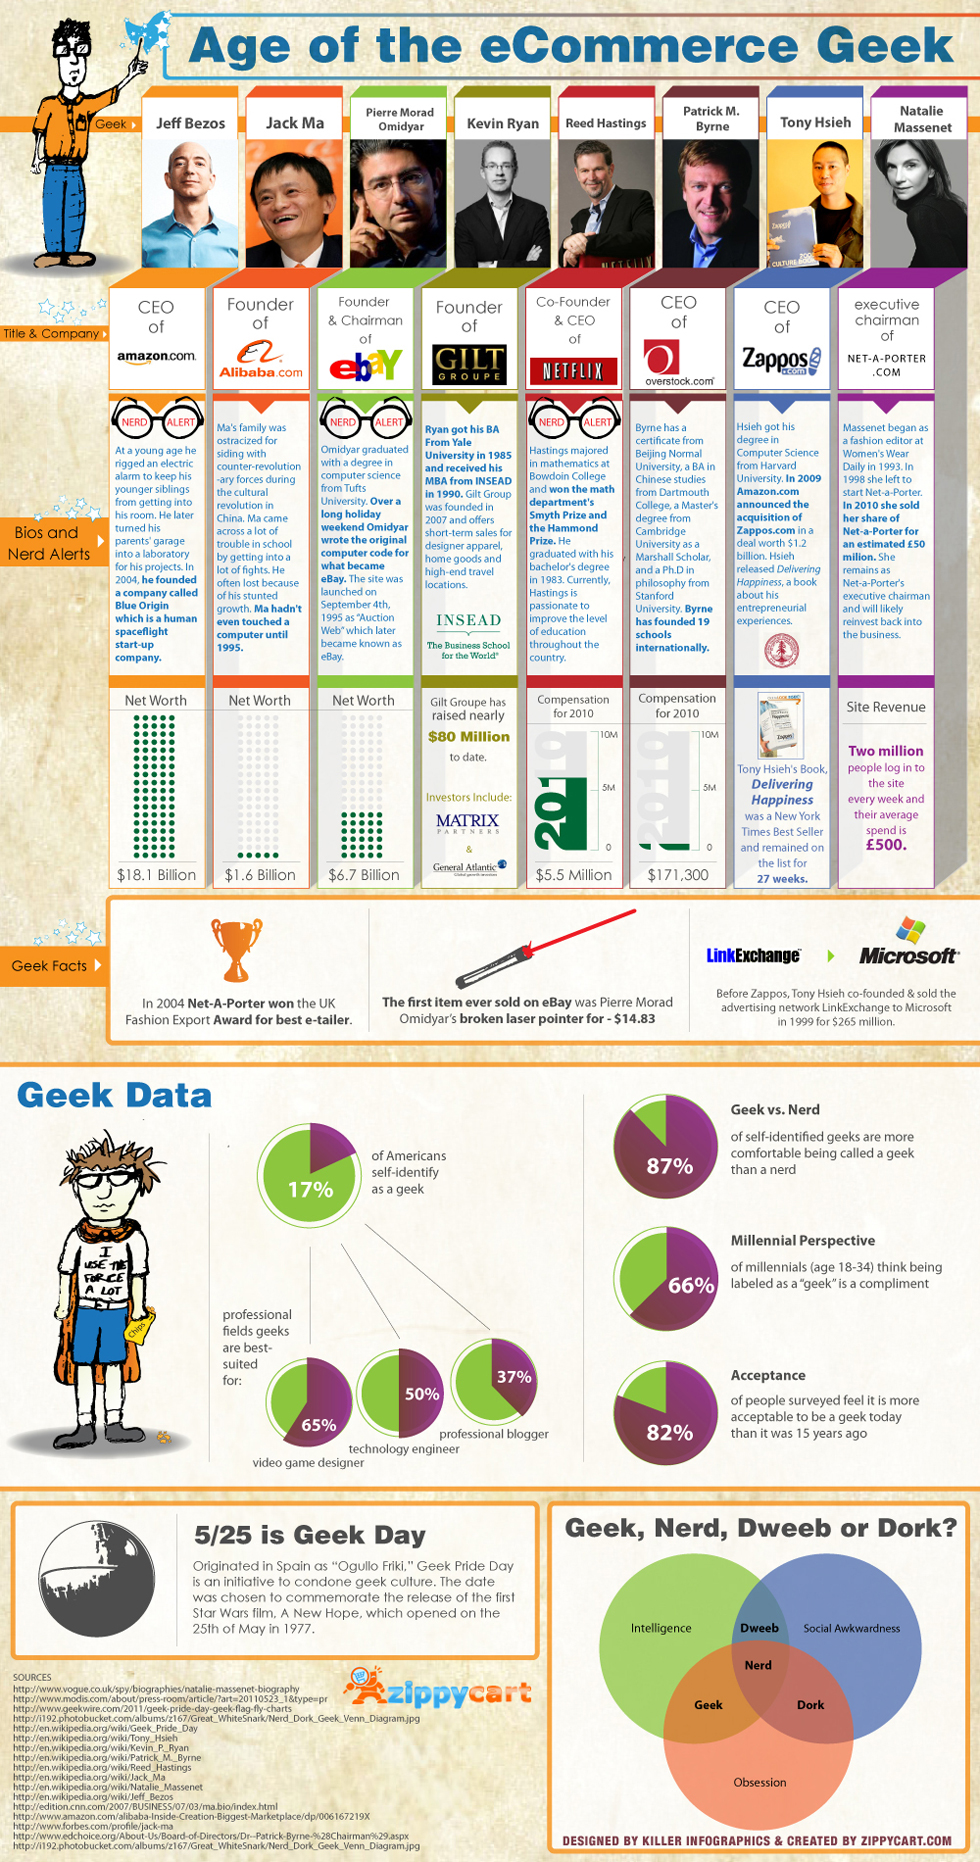 The Age of the Ecommerce Geek